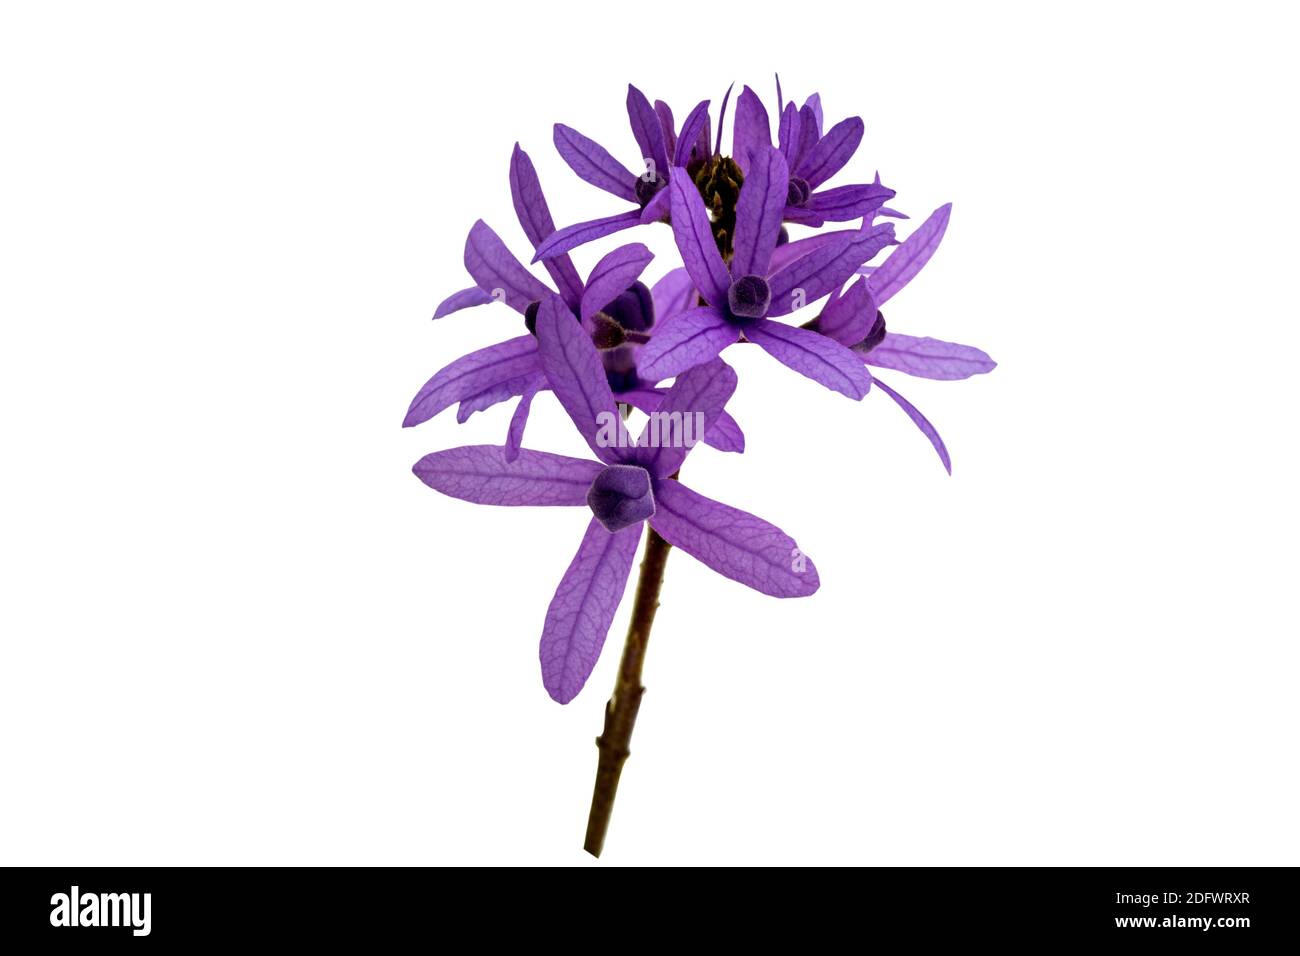 Sandpaper vine , Petrea volubilis,purple flower isolated on white background.Saved with clipping path. Stock Photo